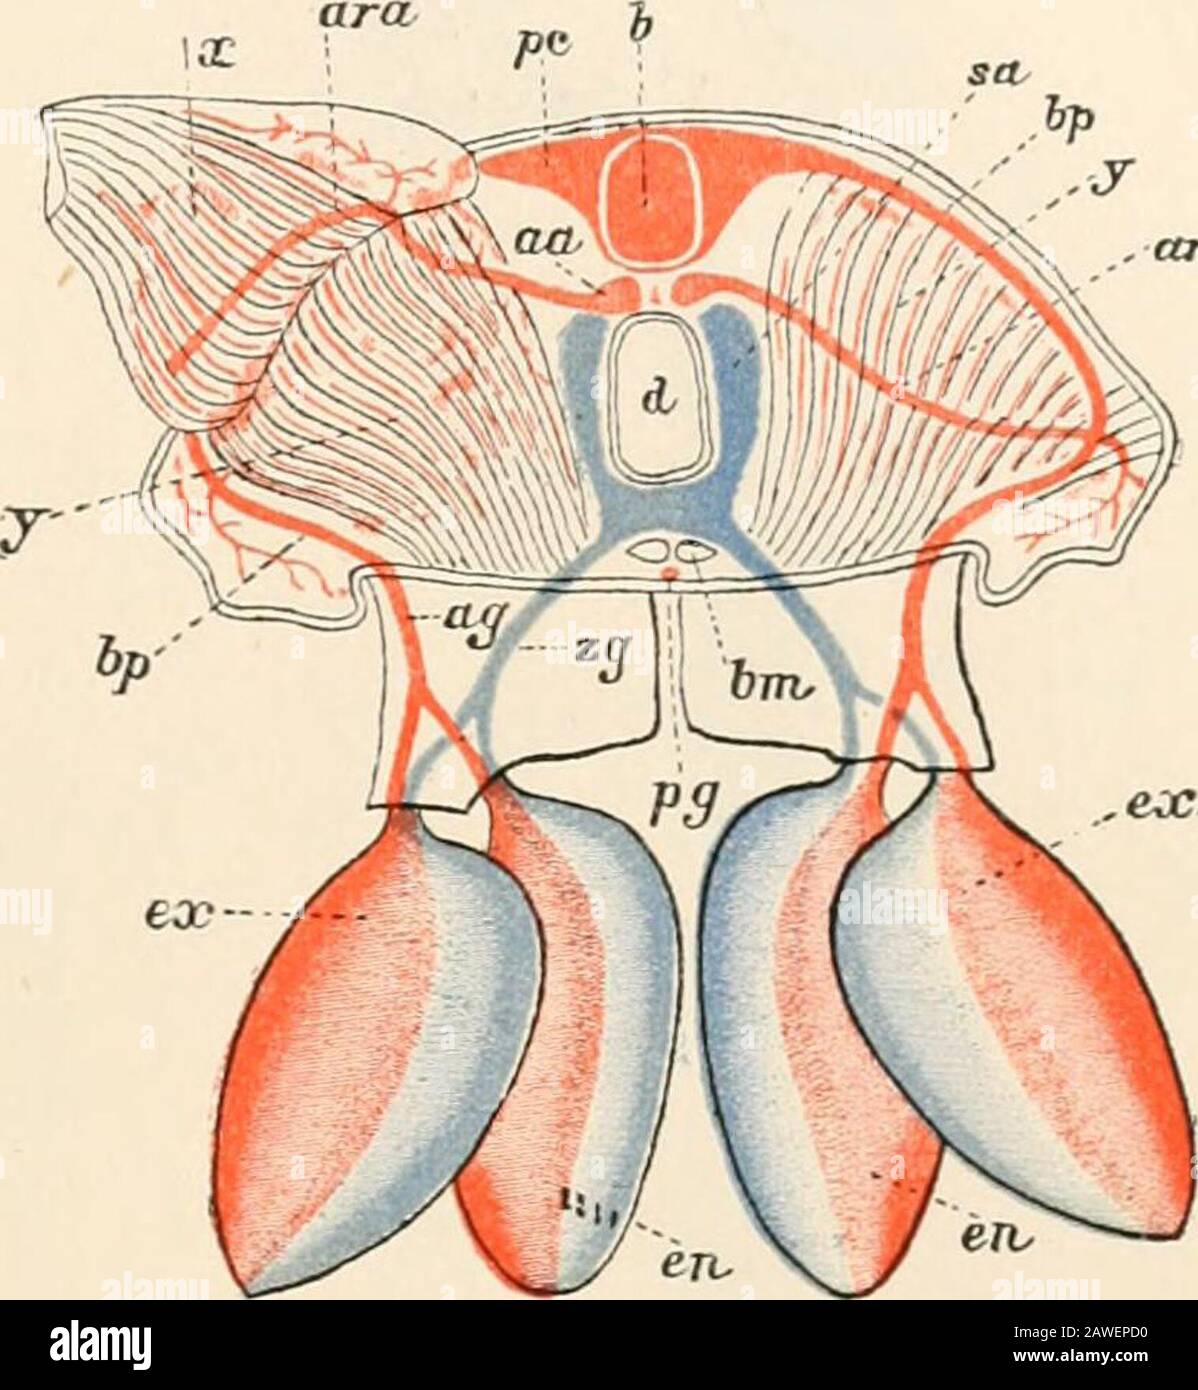 Text-book of comparative anatomy . .lr O.CL FIG. 240.— Diagram of the circulatory system of the Isopoda, seen from the side. The rightthoracic and cephalic walls removed. A part of the intestine (d) cut away (after Delage). Arterialsystem red, venous system blue, nervous system black. a»i, Anterior; an*, posterior antemue ;c(b, cephalo-thorax ; II-V1II, 7 free thoracic segments; u-^-a-j, V abdominal segments; br, gills(pleopoda) ; g, brain ; rl, intestine ; A, heart ; o, ostium of the heart ; pc, pericardium ; mi, anterioraorta ; la, lateral arteries ; t, thoracic arteries ; ha, hepatic artery Stock Photo